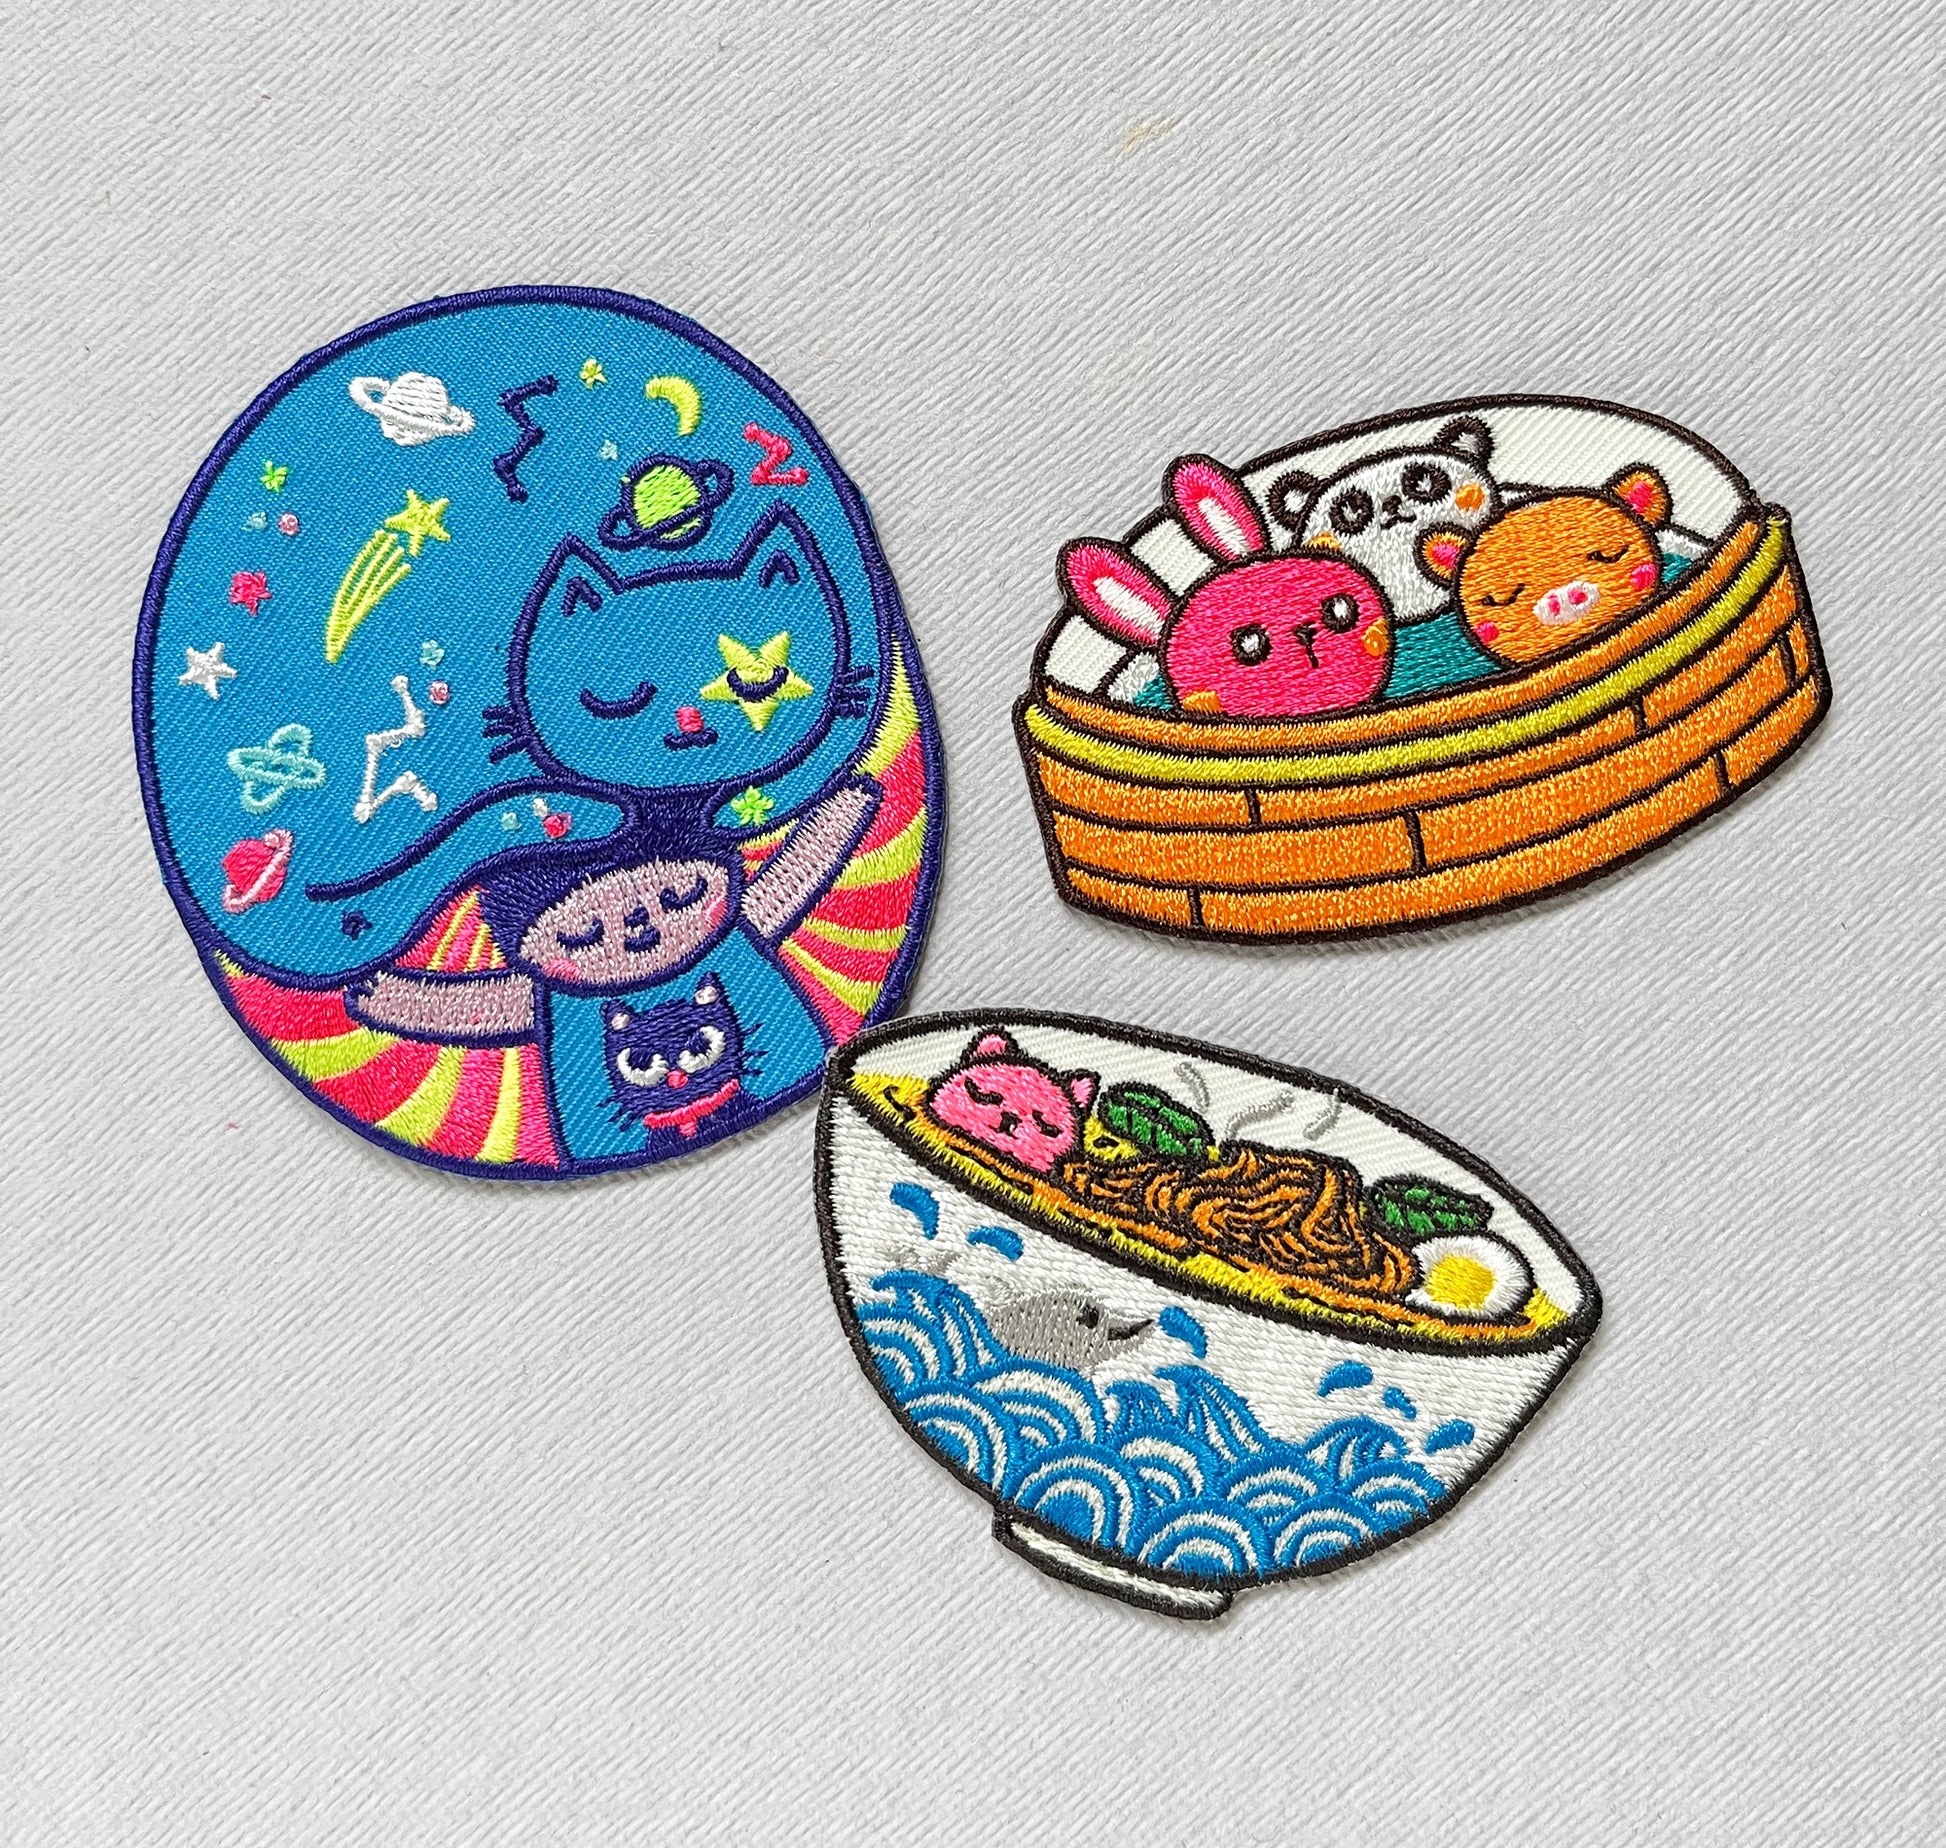 Small Patches - Kawaii Patches - Food Patches - Tiny Iron On Patch - Bread  Patch - Small Embroidery Patch -…